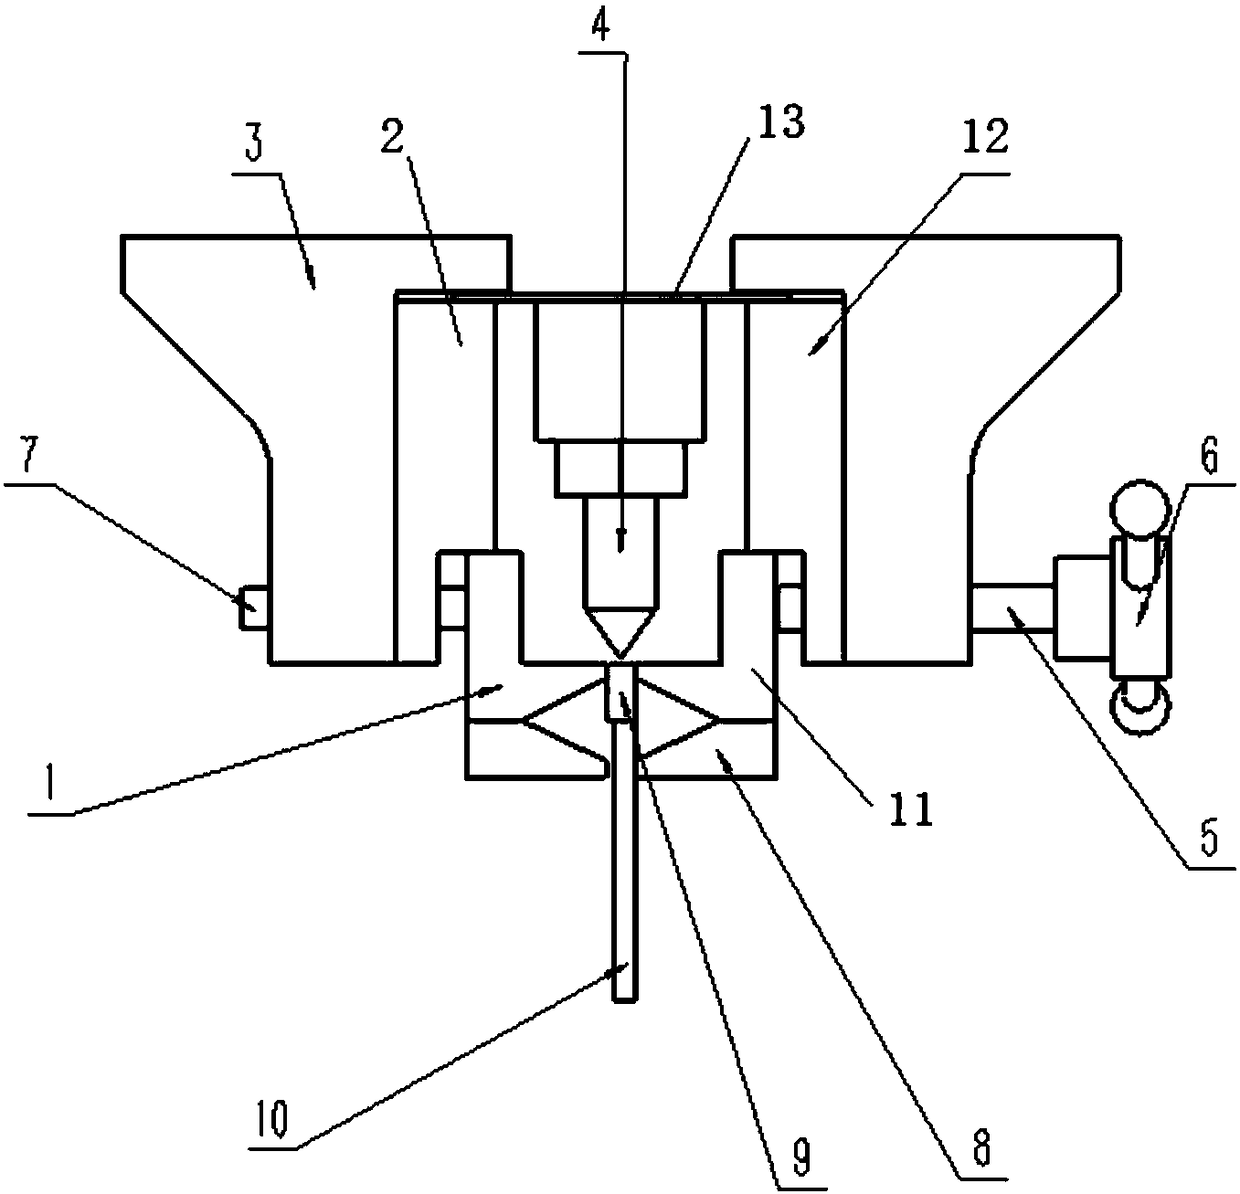 A device and method for welding a diamond segment